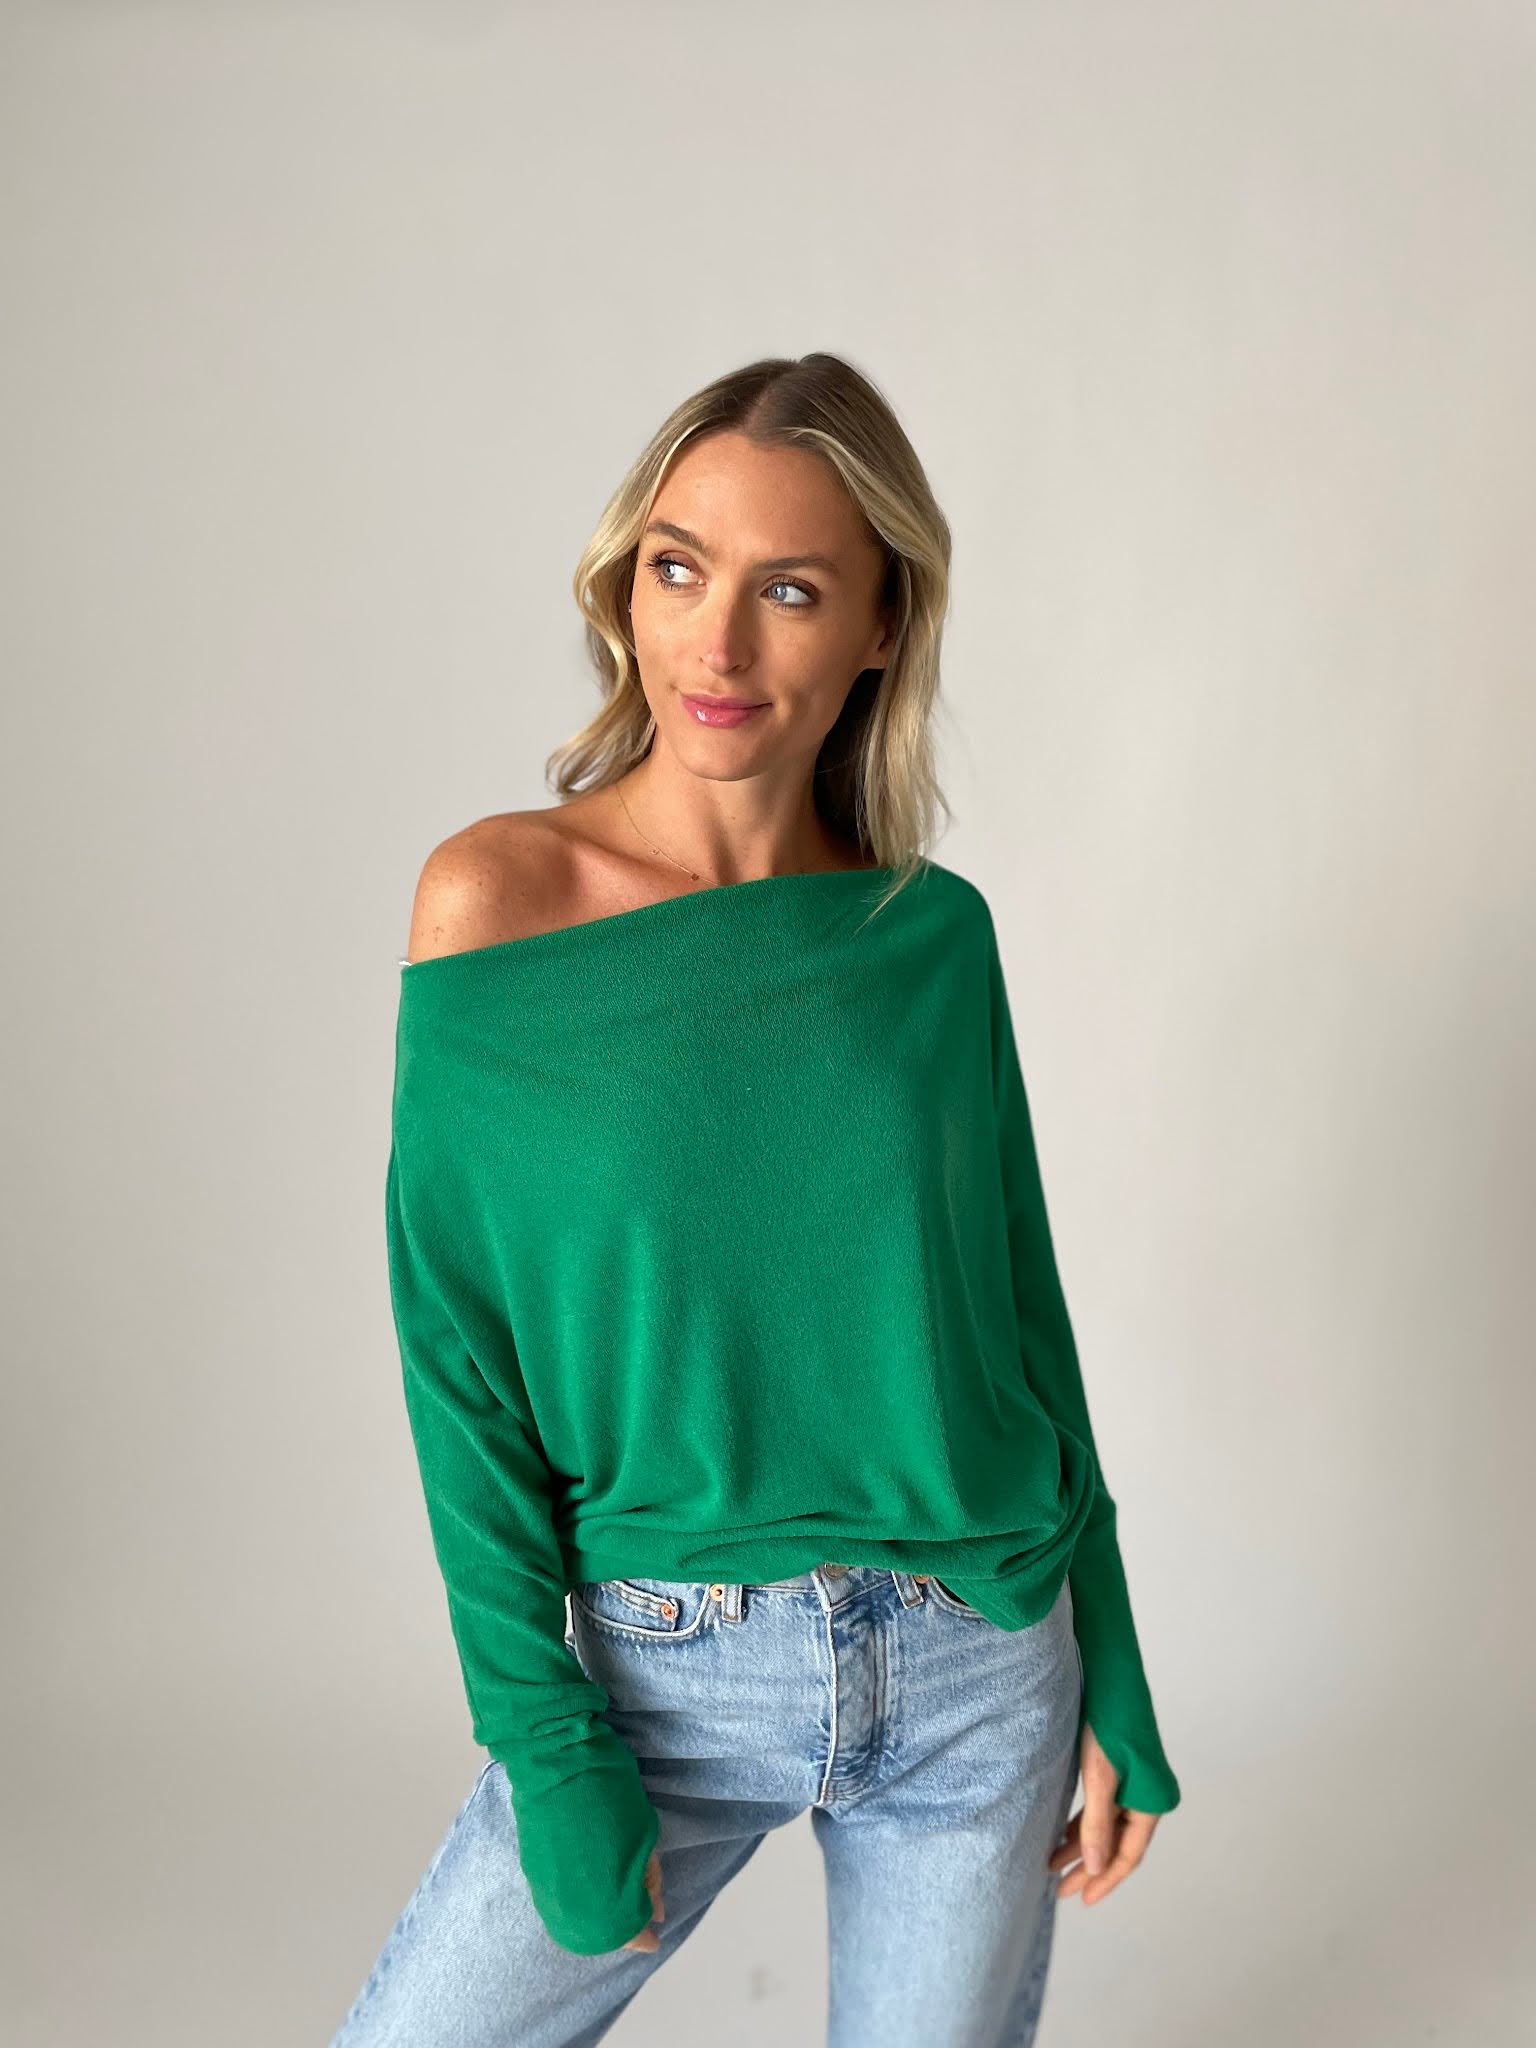 The Anywhere Top in Kelly Green